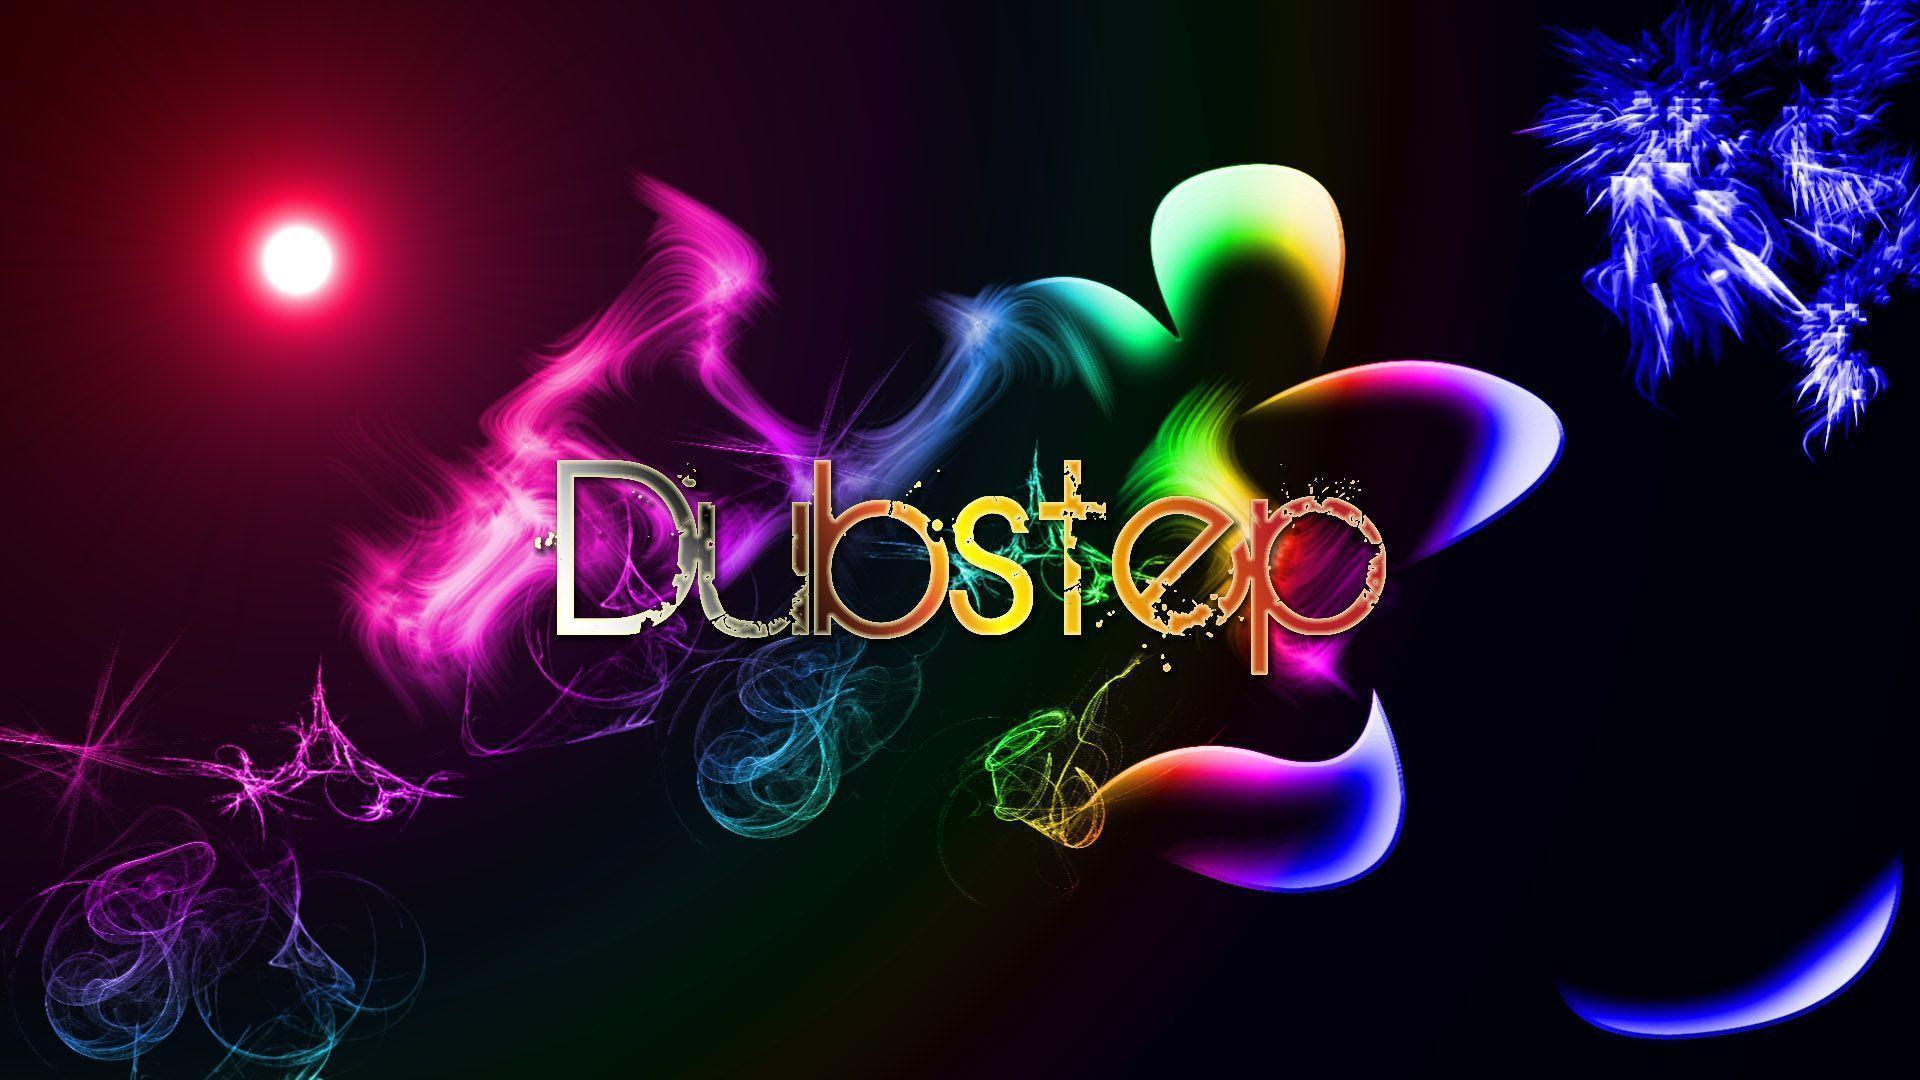 Dubstep Electronic Music Wallpaper Wide or HD